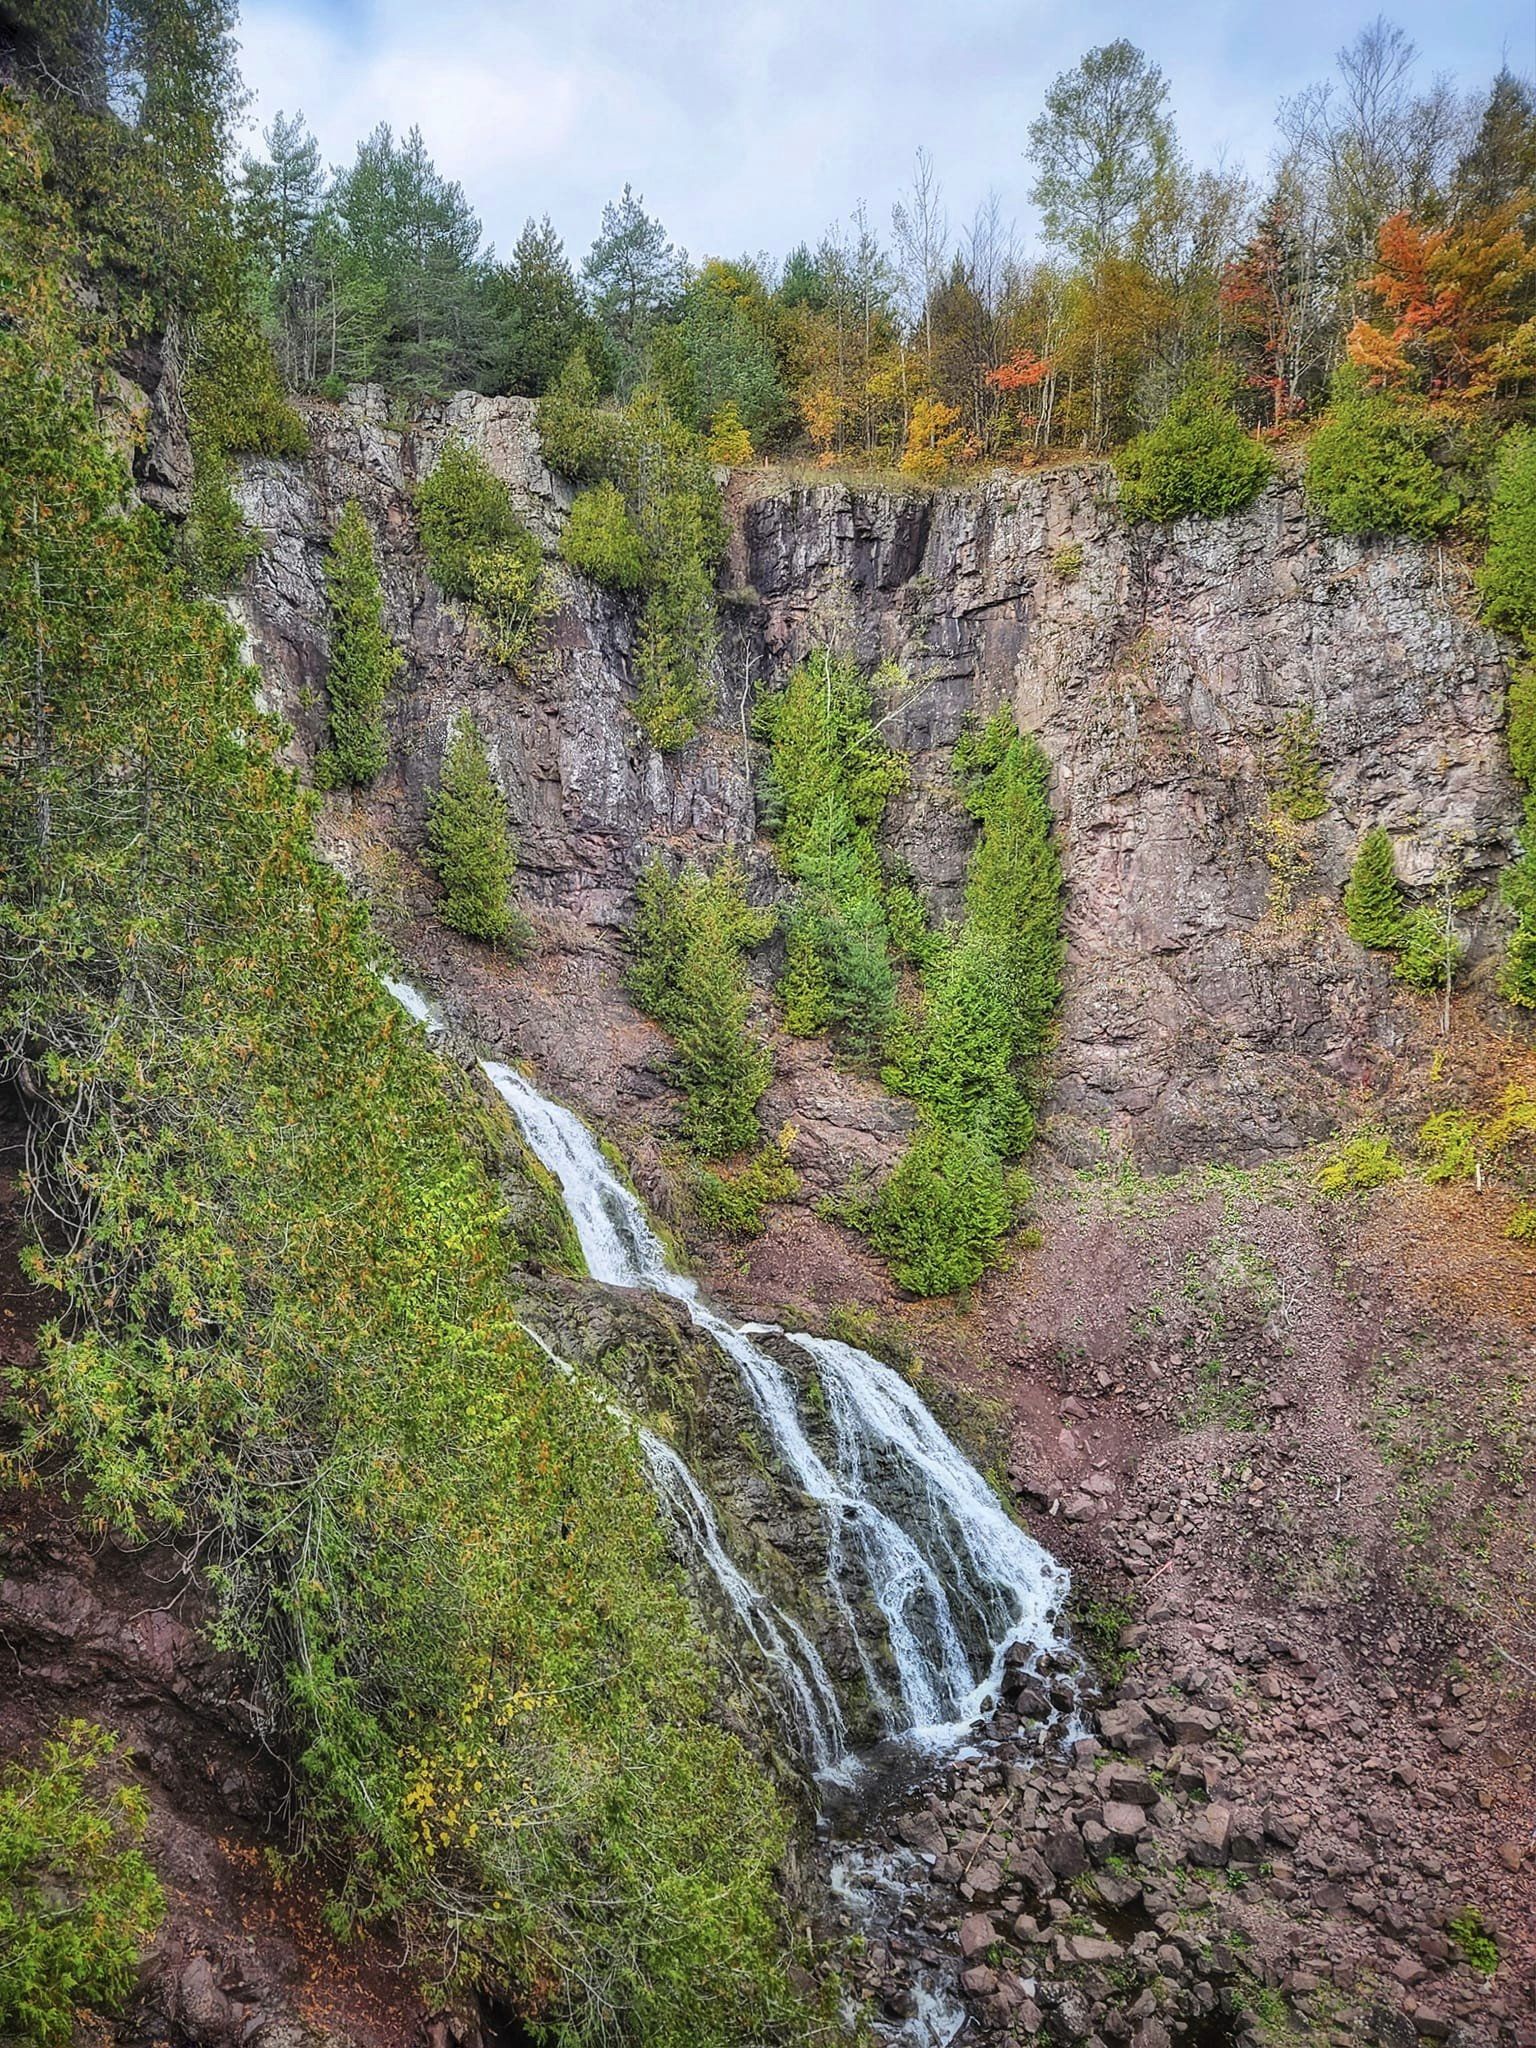 Featured image for “Houghton-Douglass Falls: A Hiker’s Guide to the Keweenaw Peninsula”